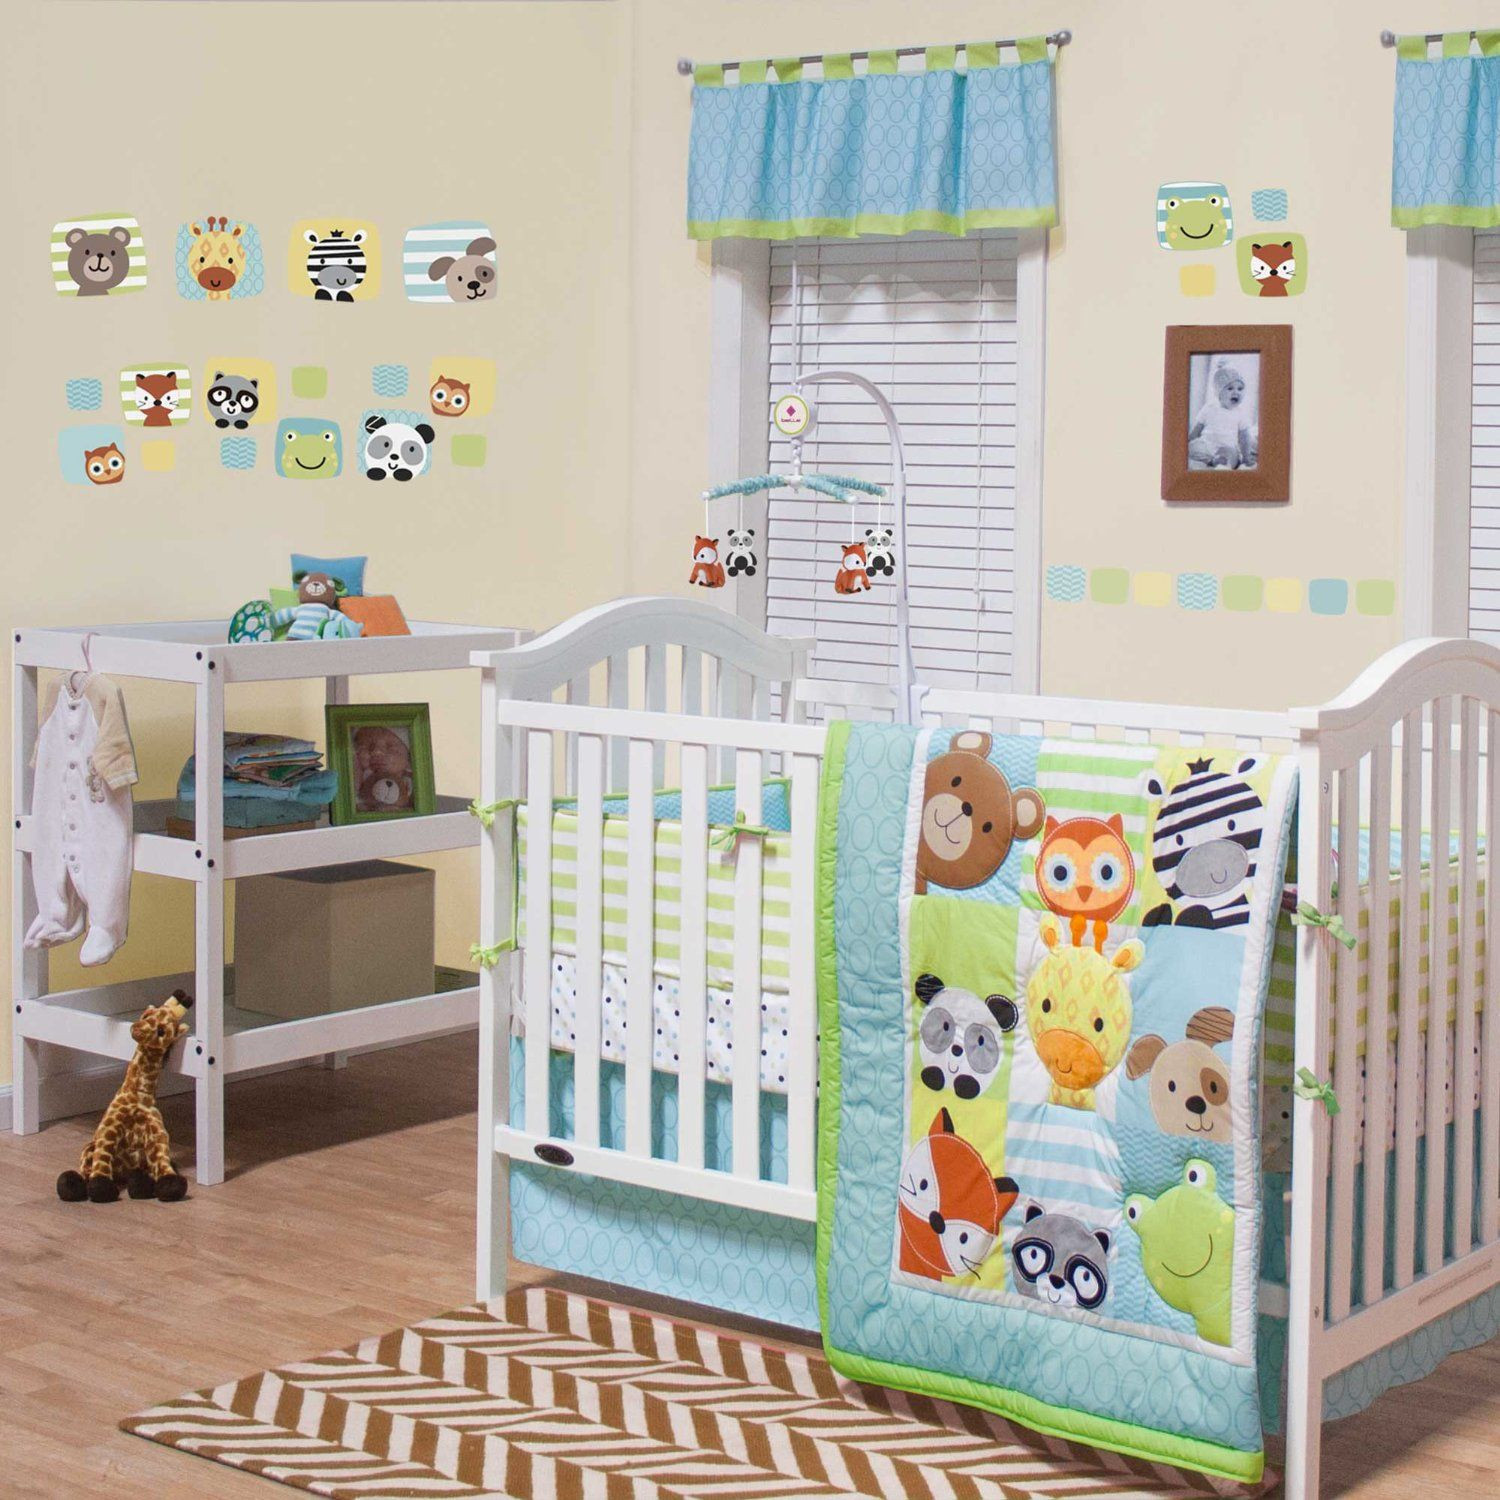 Belle Baby Bedding And Decor
 Belle Hide and Seek Baby Bedding and Decor